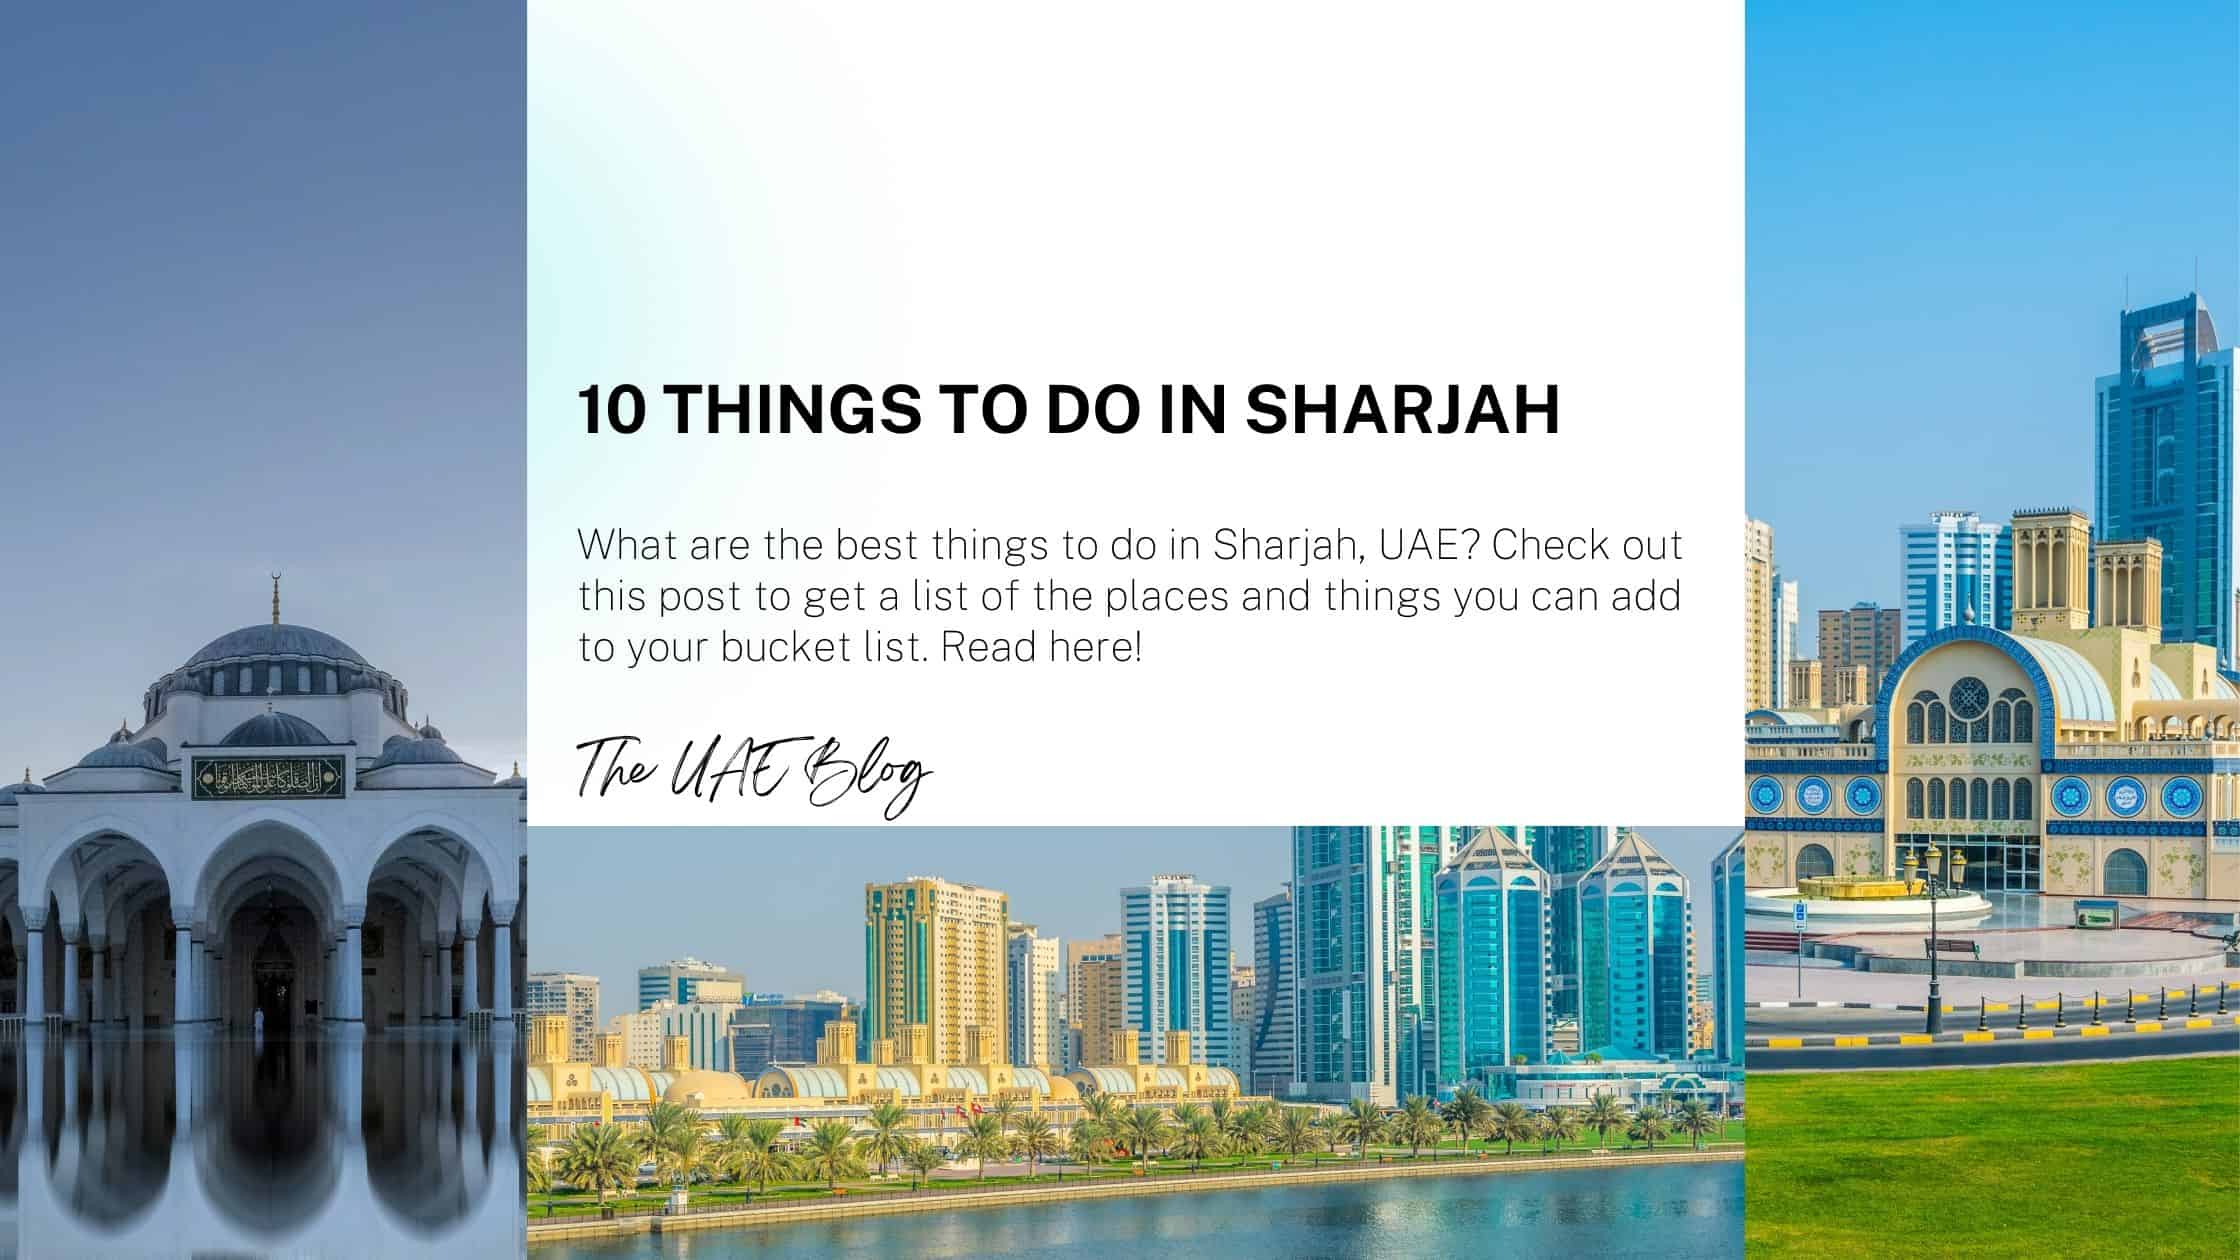 10 things to do in Sharjah